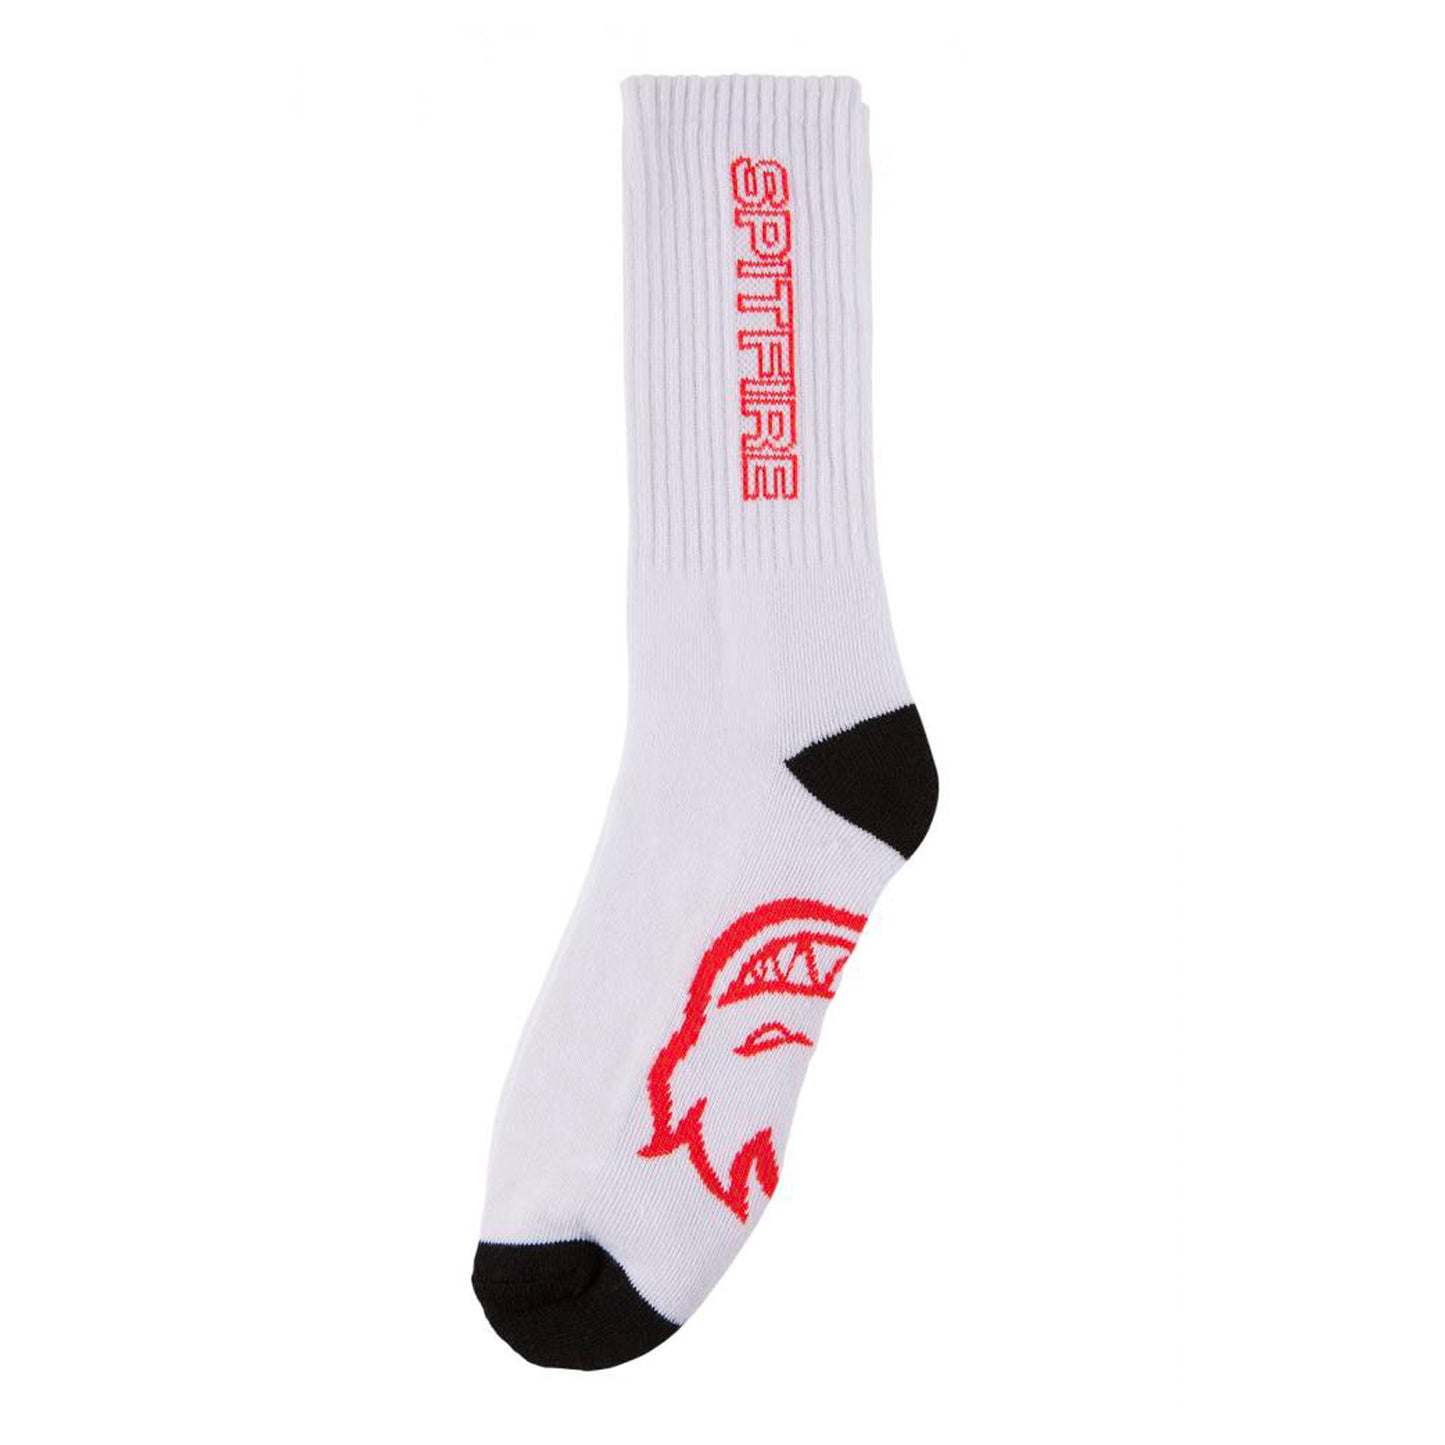 Spitfire Classic 87' Sock 3-Pack - White / Black / Red - Prime Delux Store